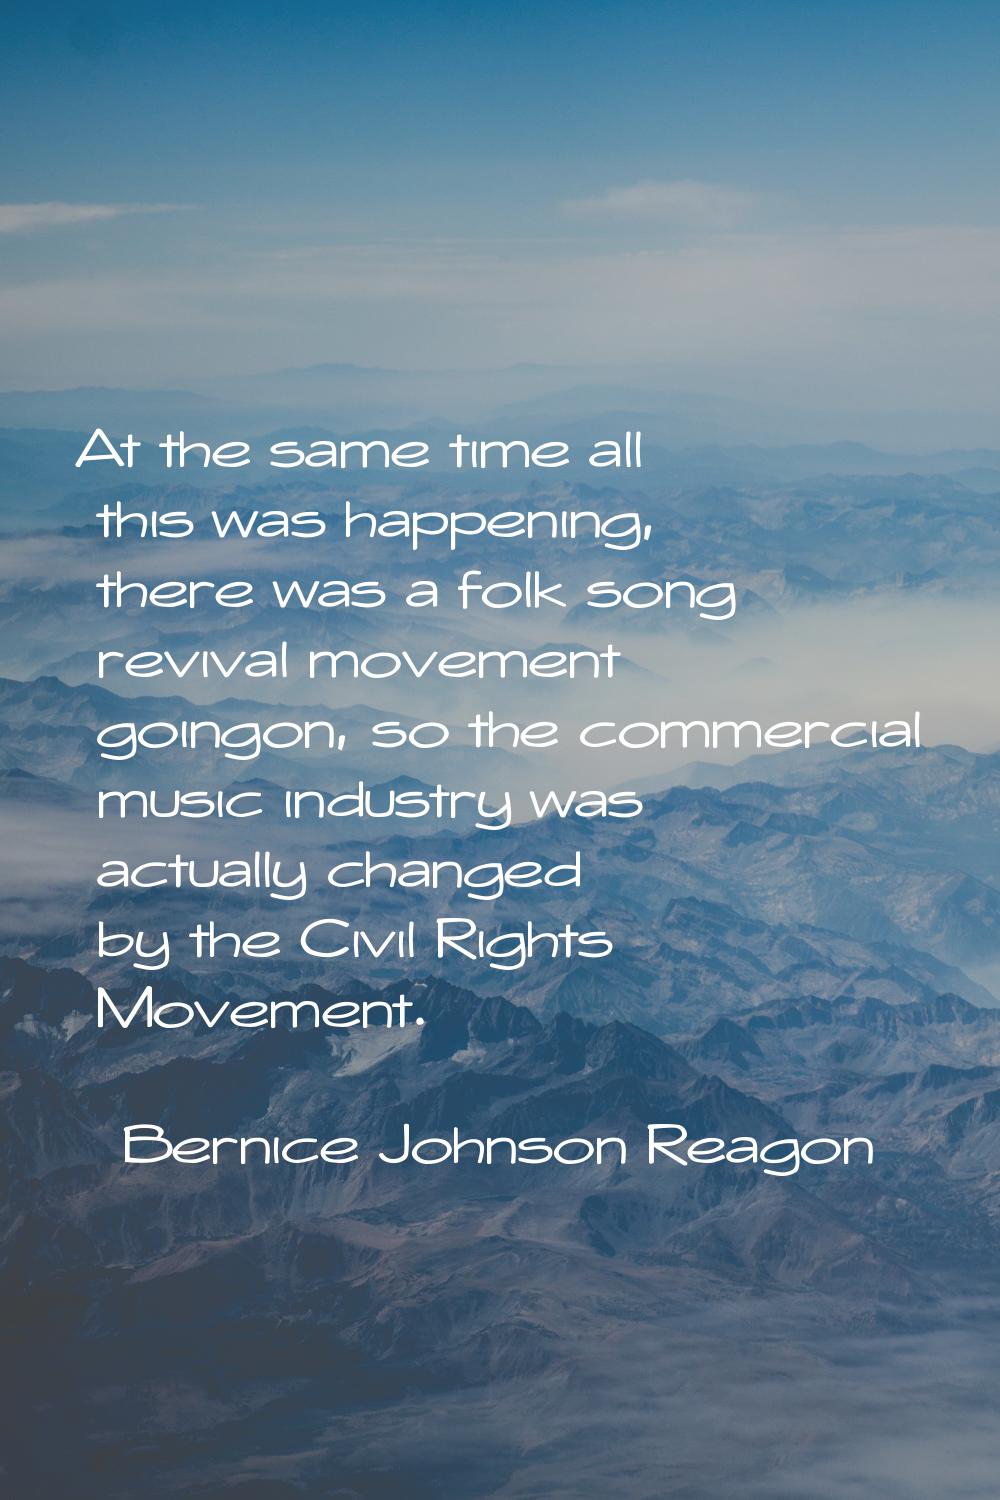 At the same time all this was happening, there was a folk song revival movement goingon, so the com